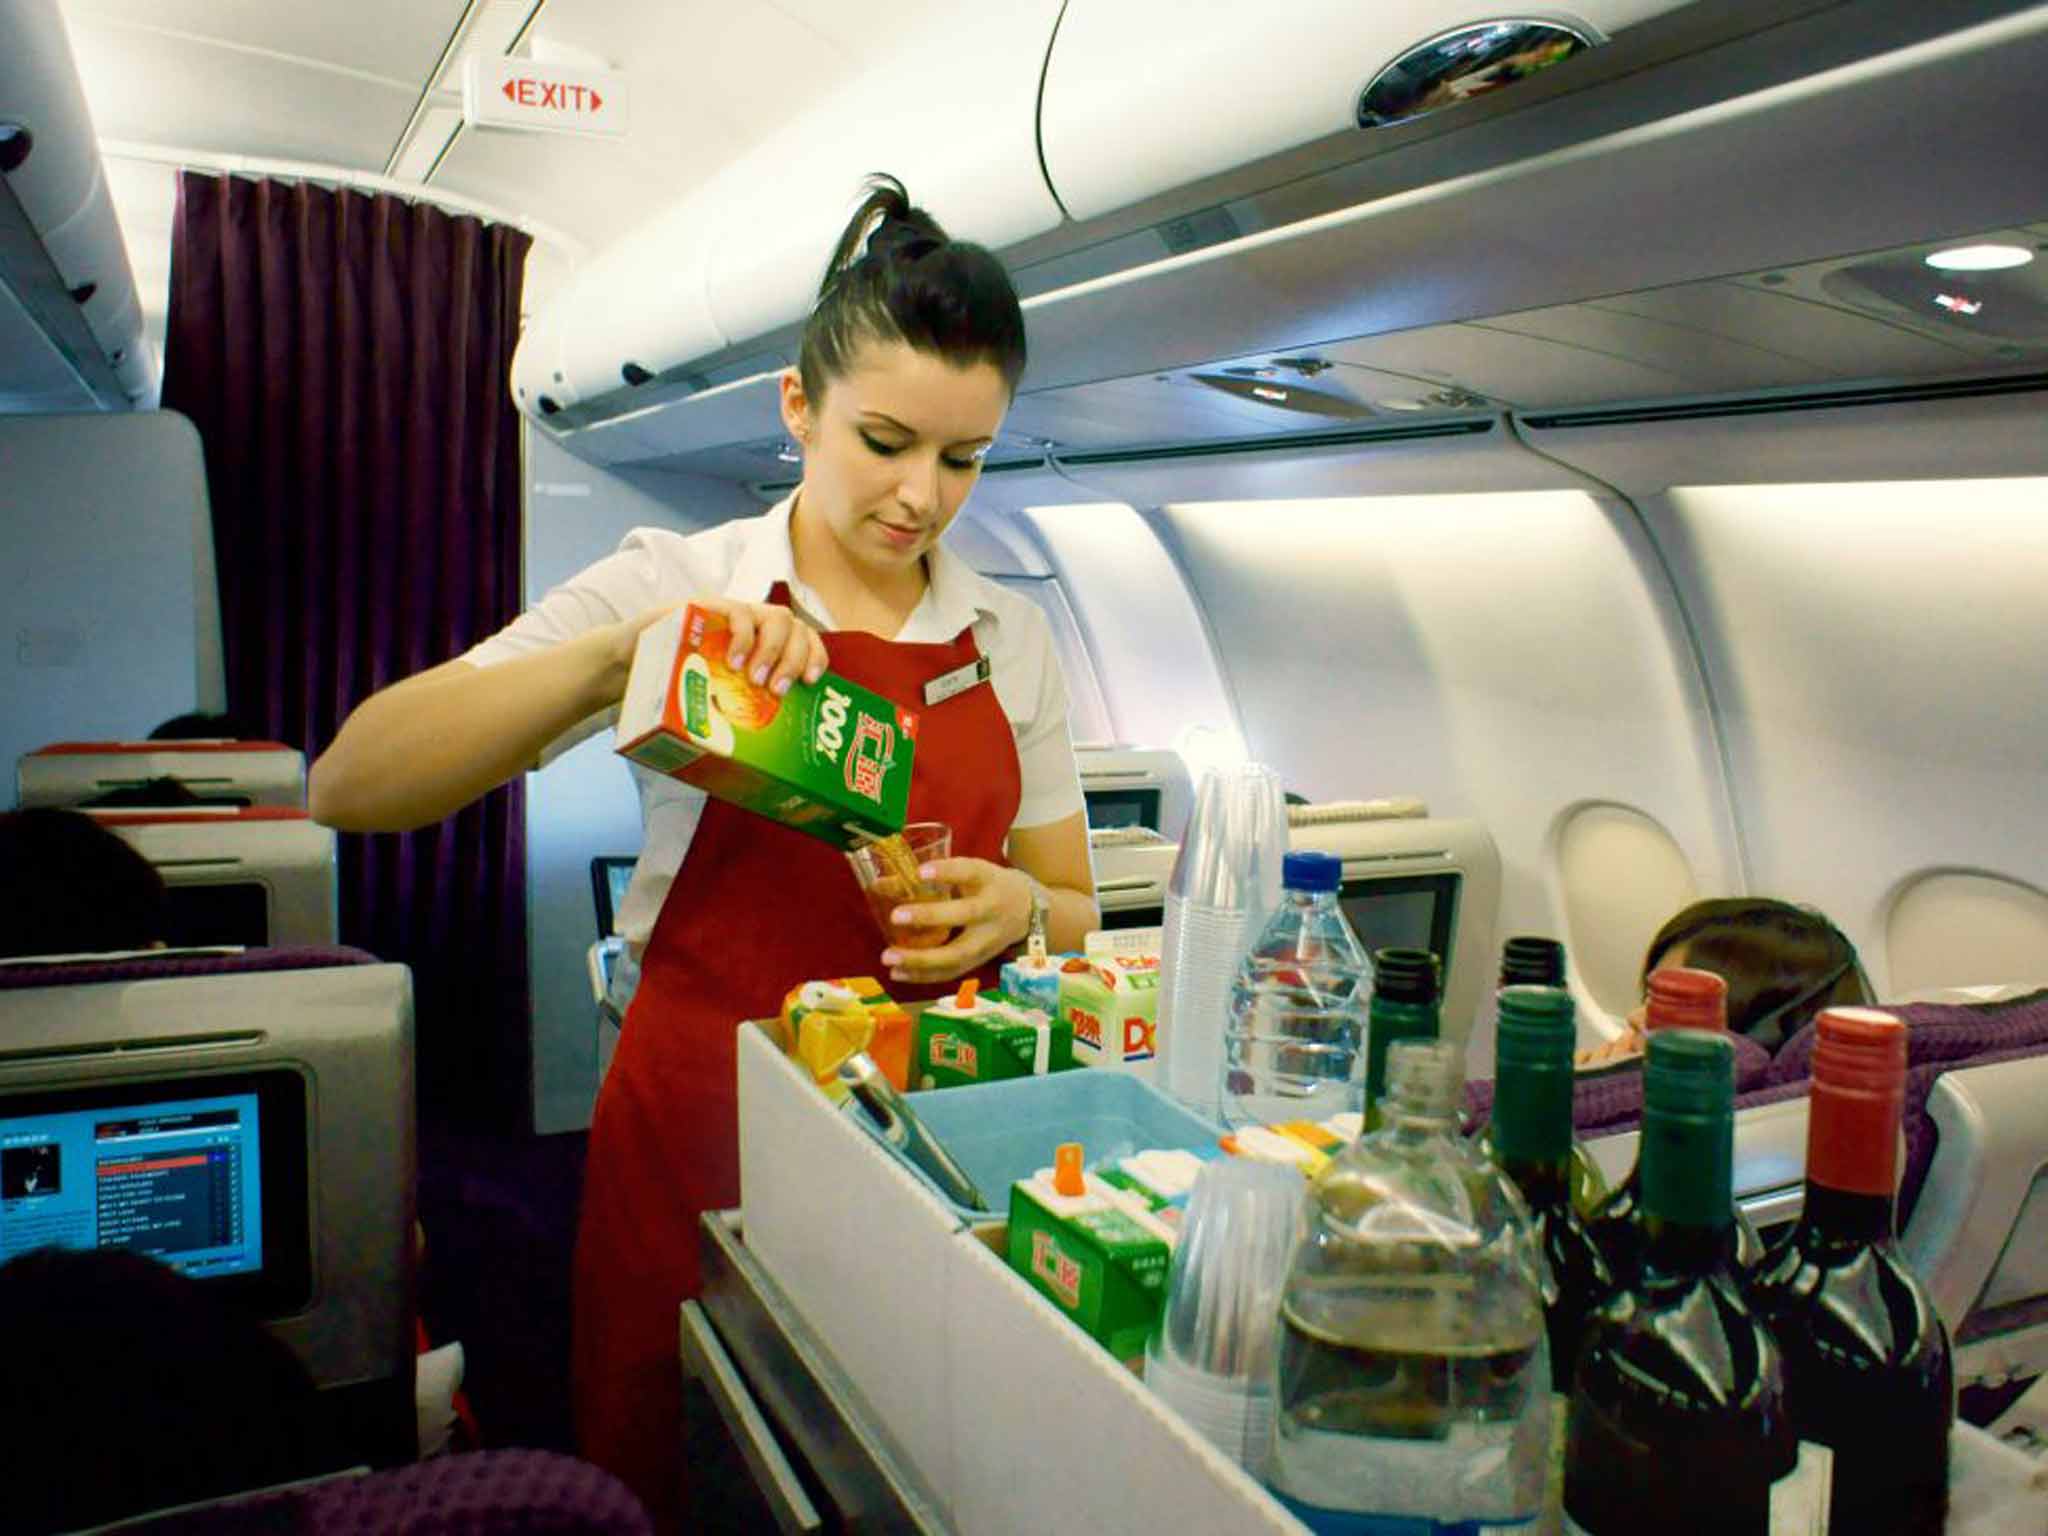 Drink in plane Stock Photos, Royalty Free Drink in plane Images